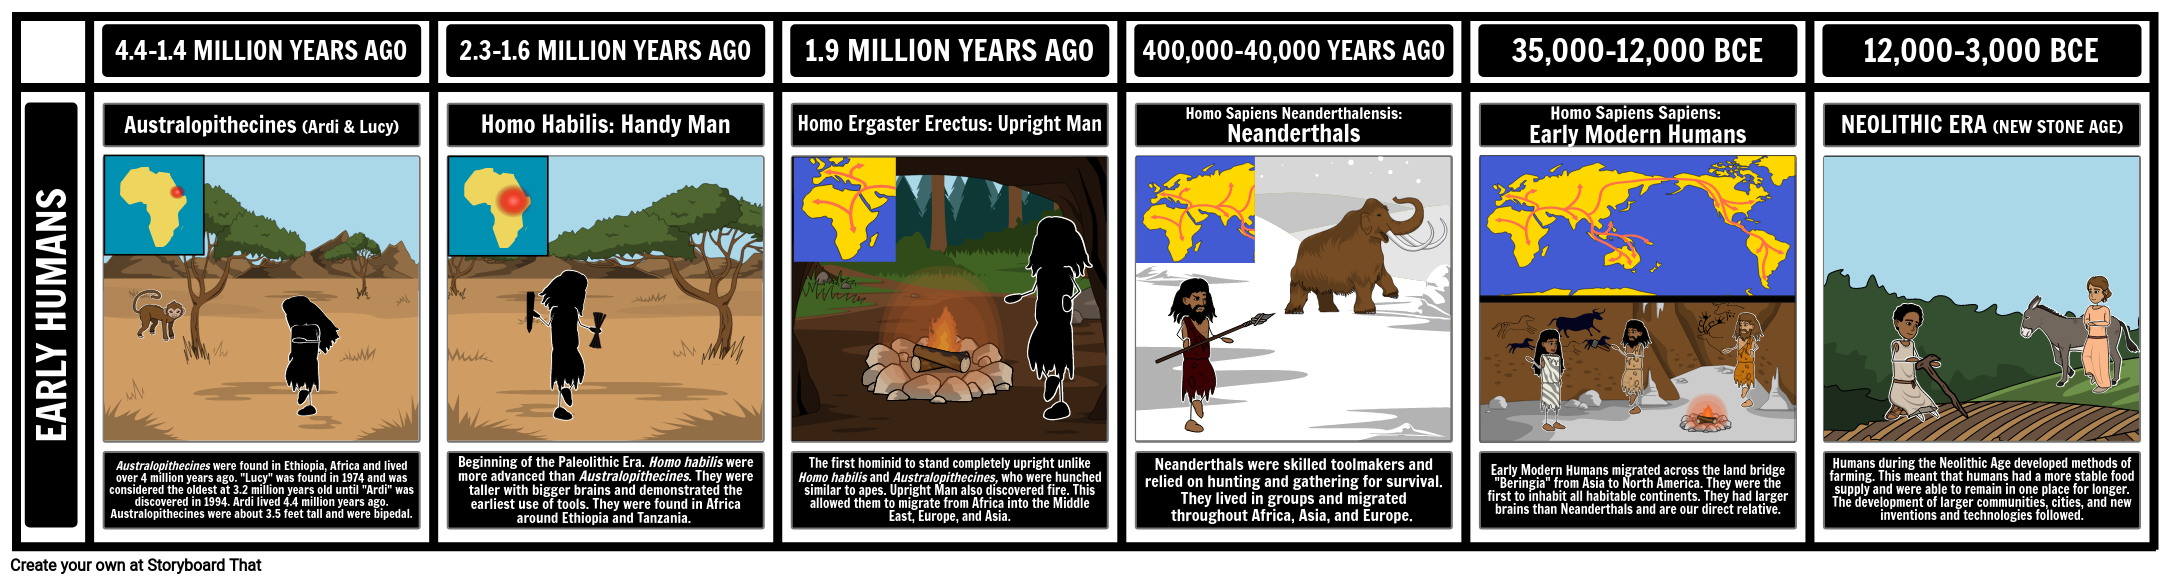 Early Humans Timeline